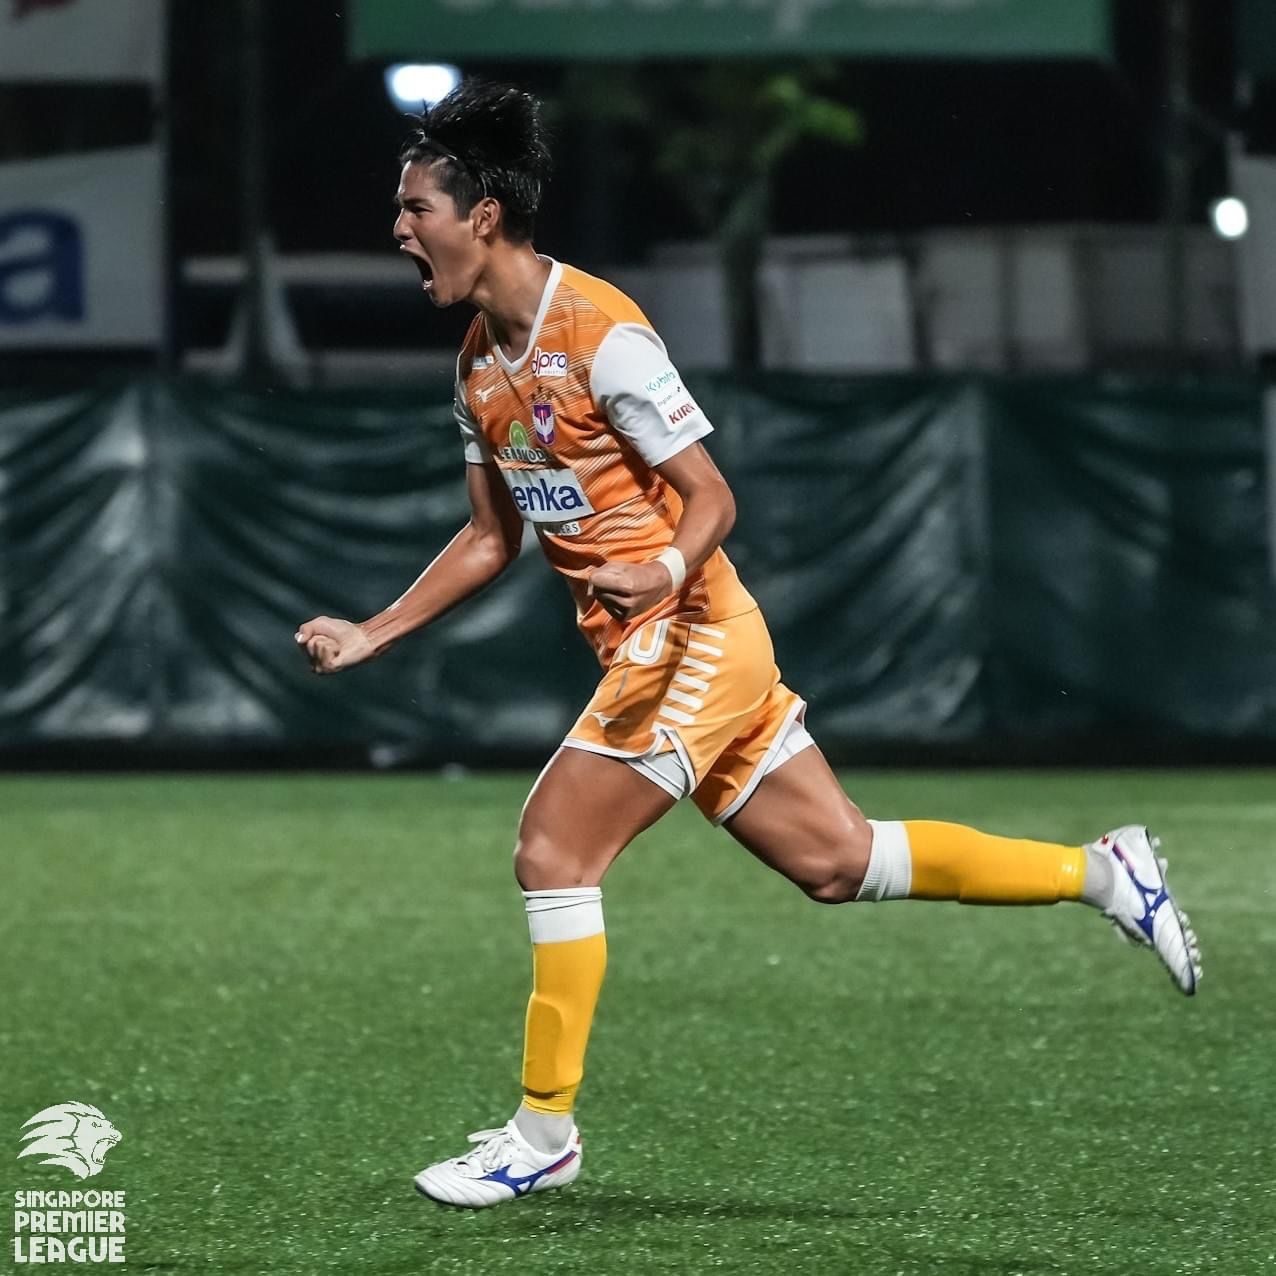 Albirex Niigata vs Young Lions Prediction, Betting Tips & Odds │10 AUGUST, 2022